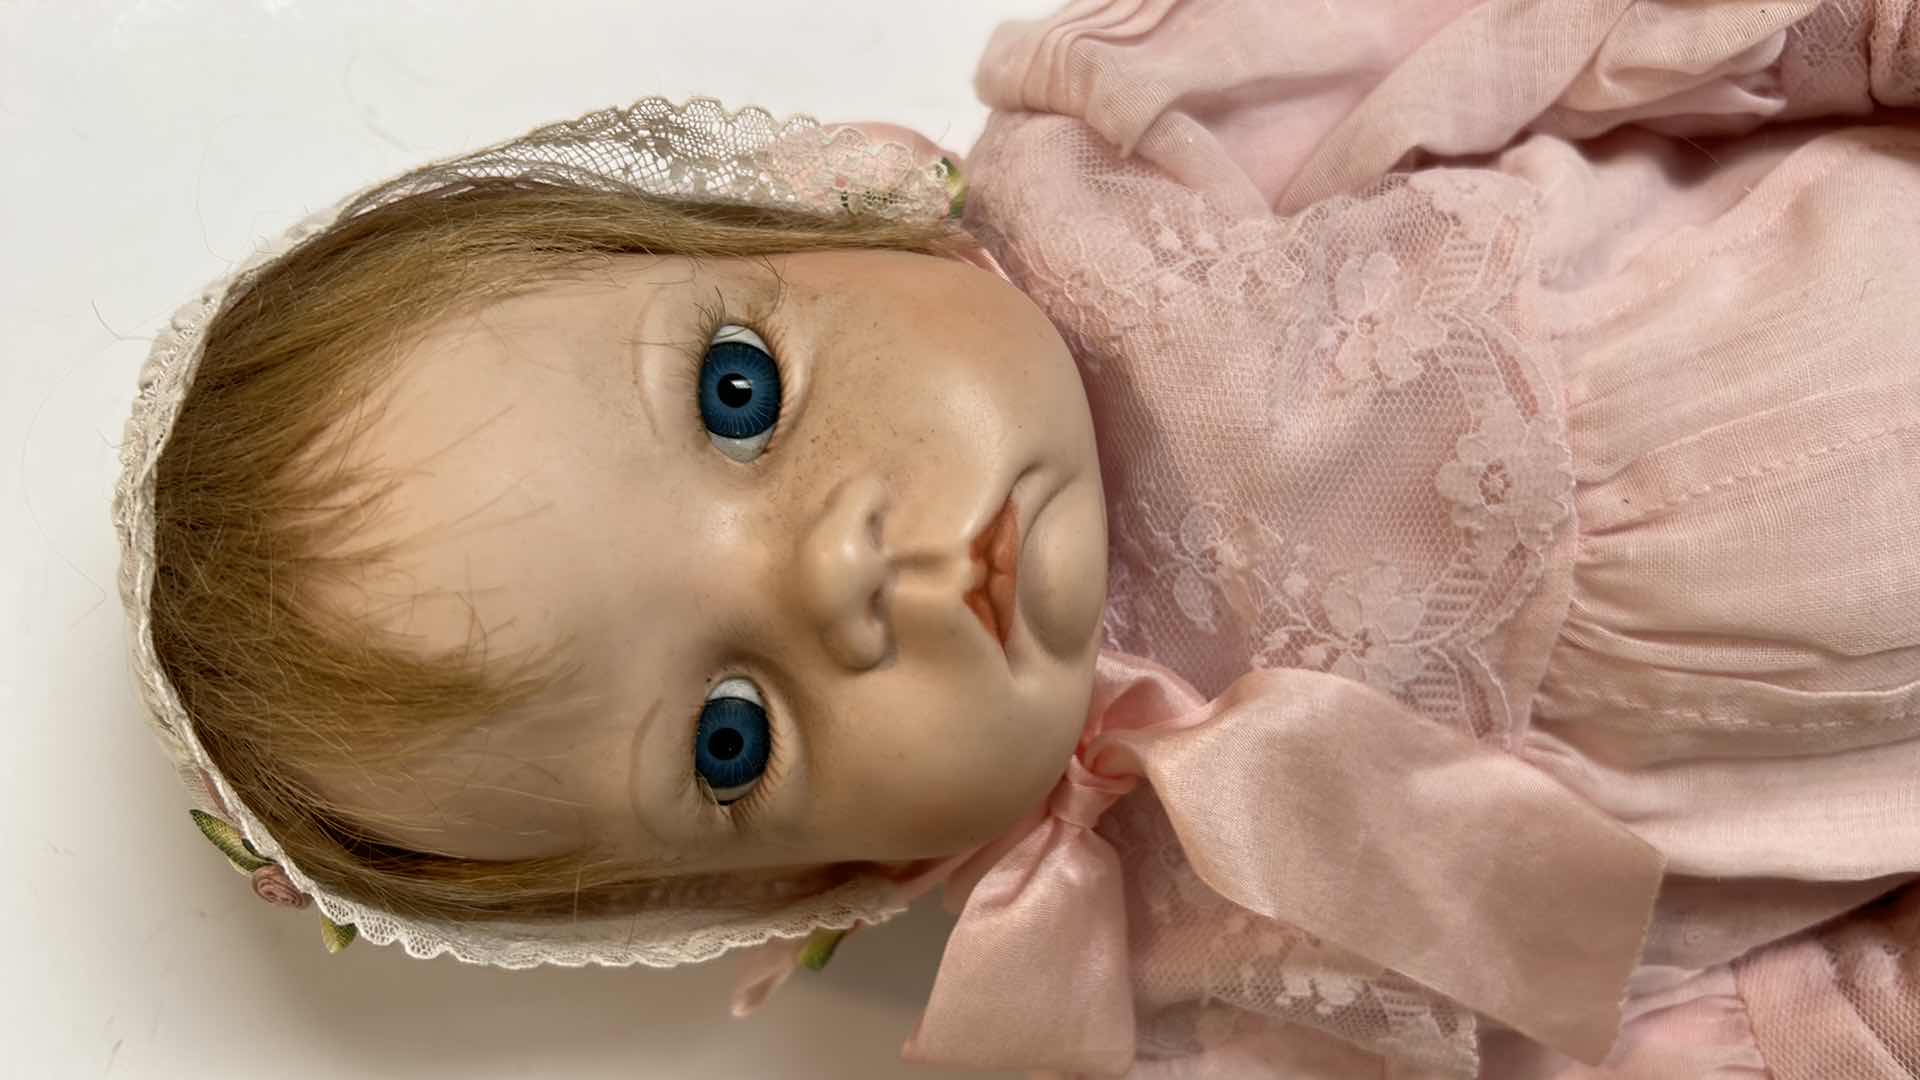 Photo 3 of VINTAGE PORCELAIN REAL LIFE LIKE BABY DOLL - MARY JO 87 H22”